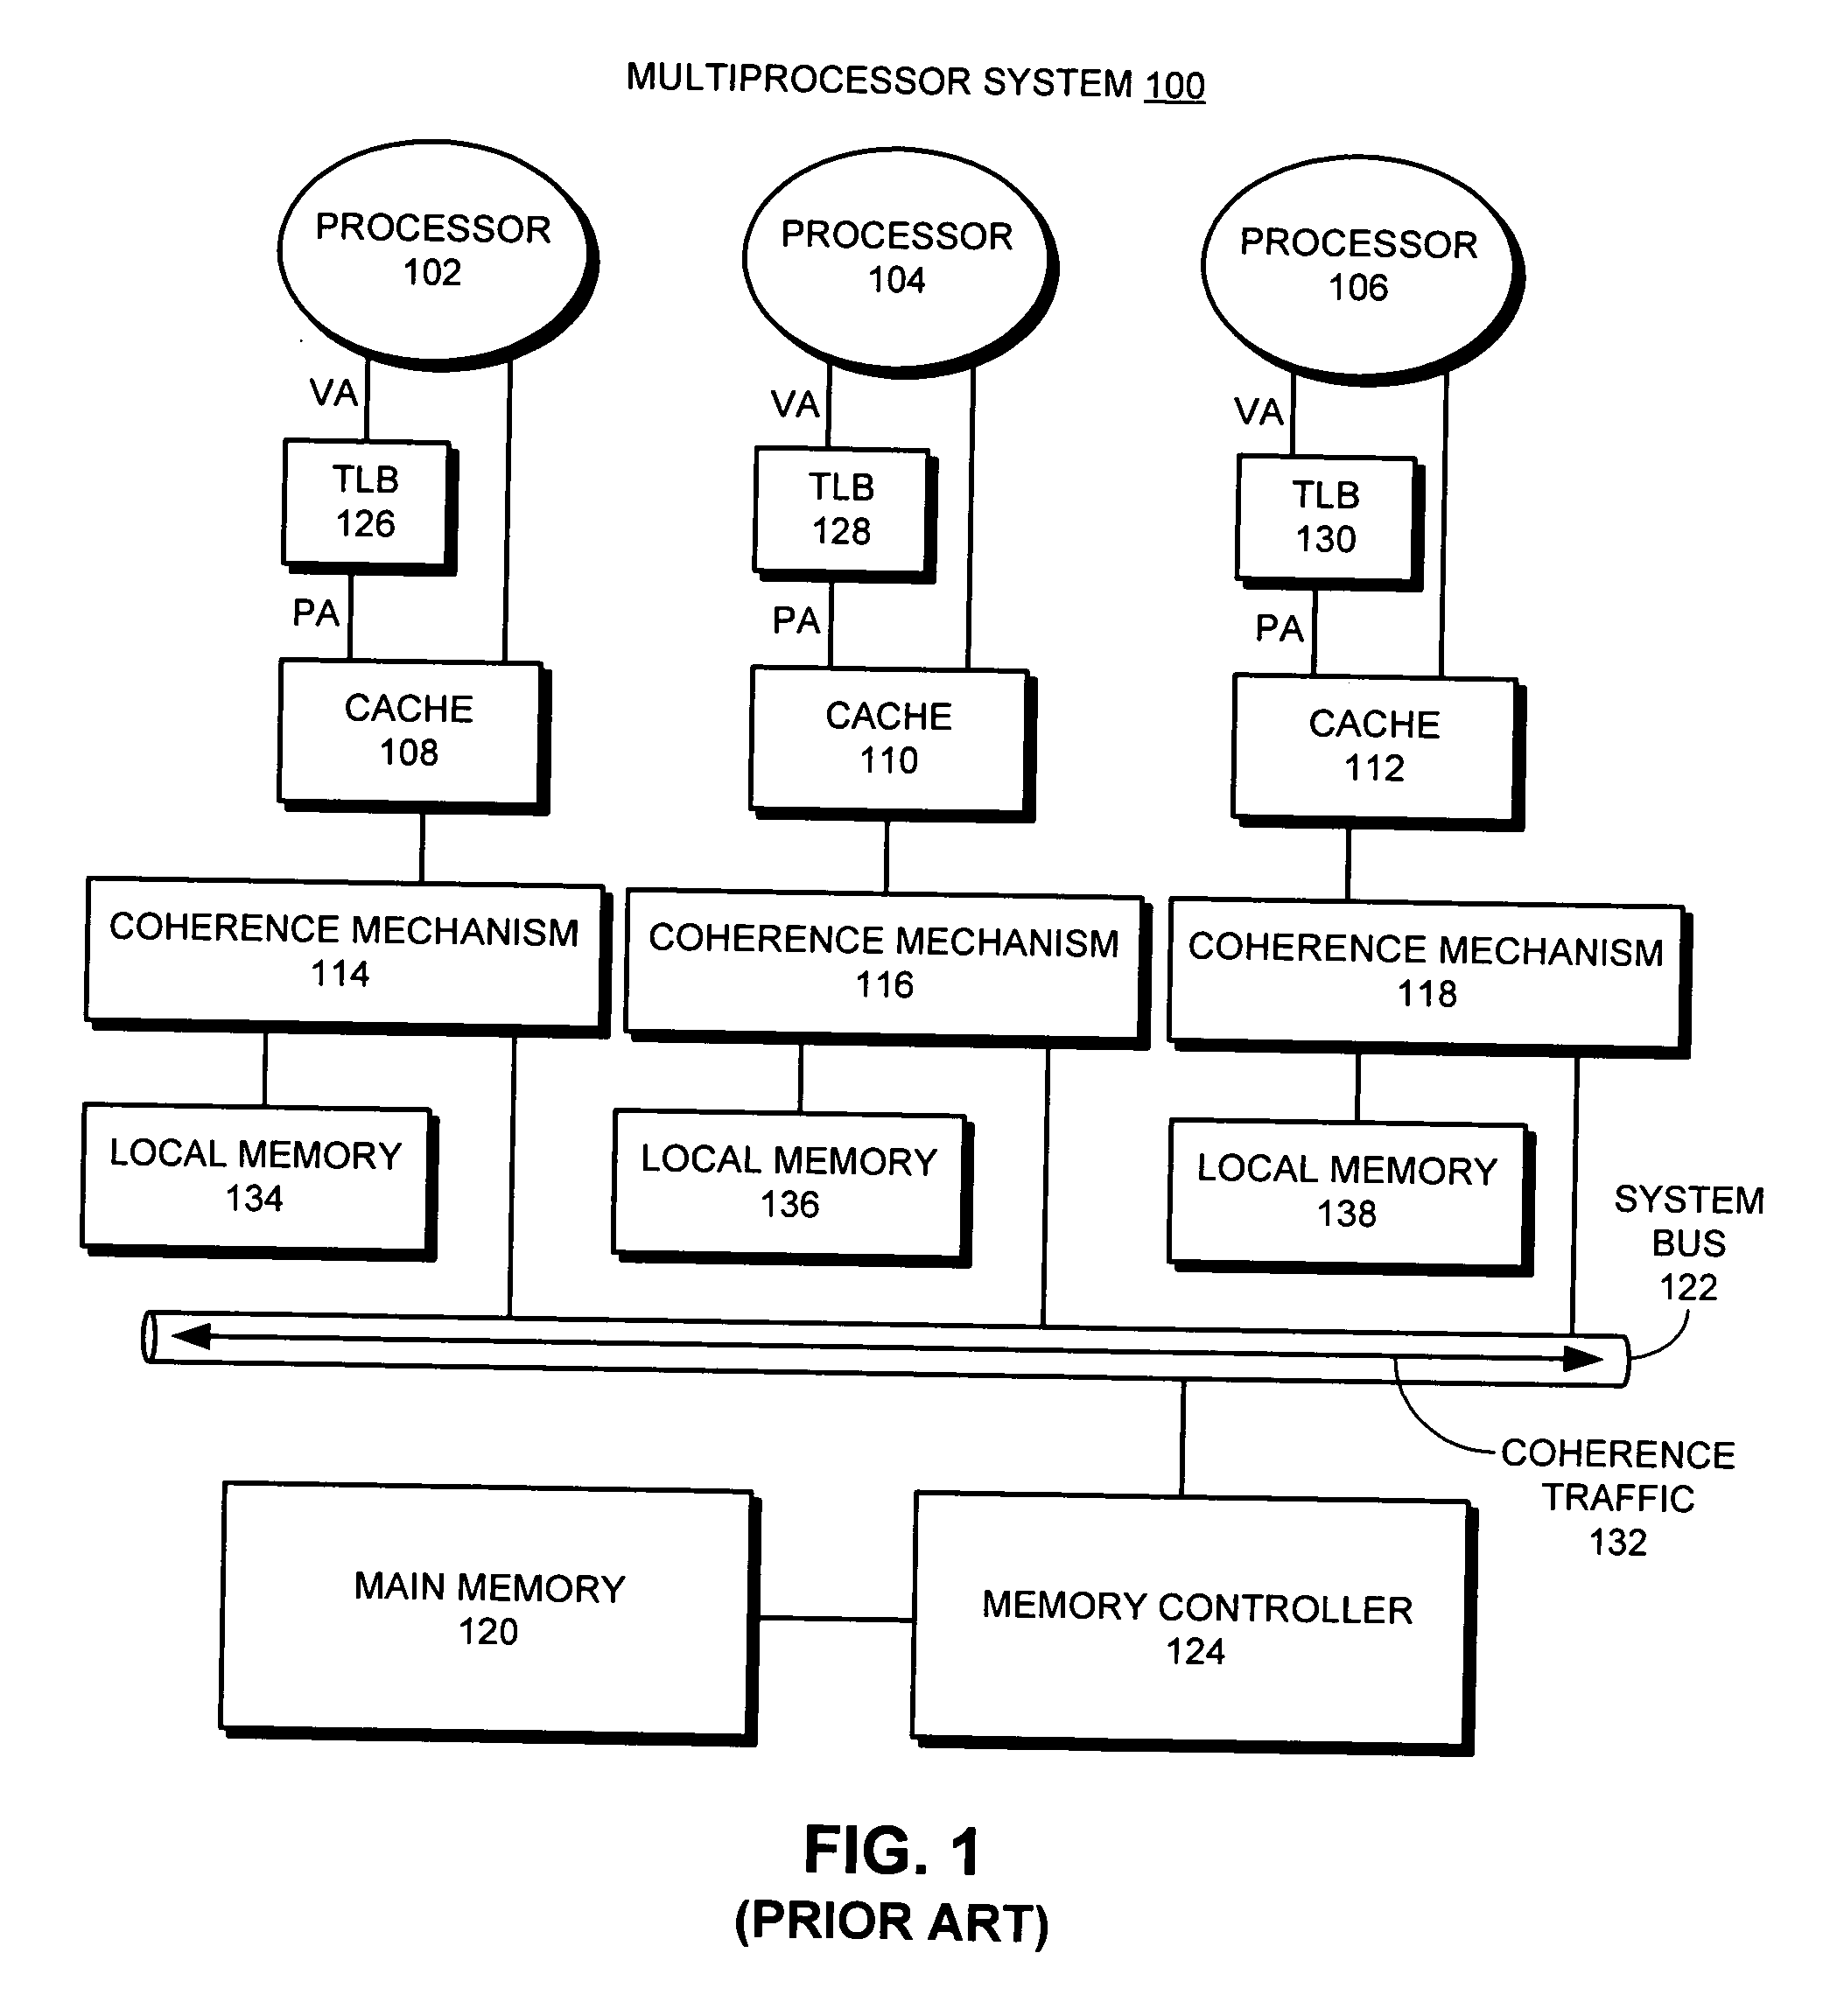 Multiprocessor system that supports both coherent and non-coherent memory accesses